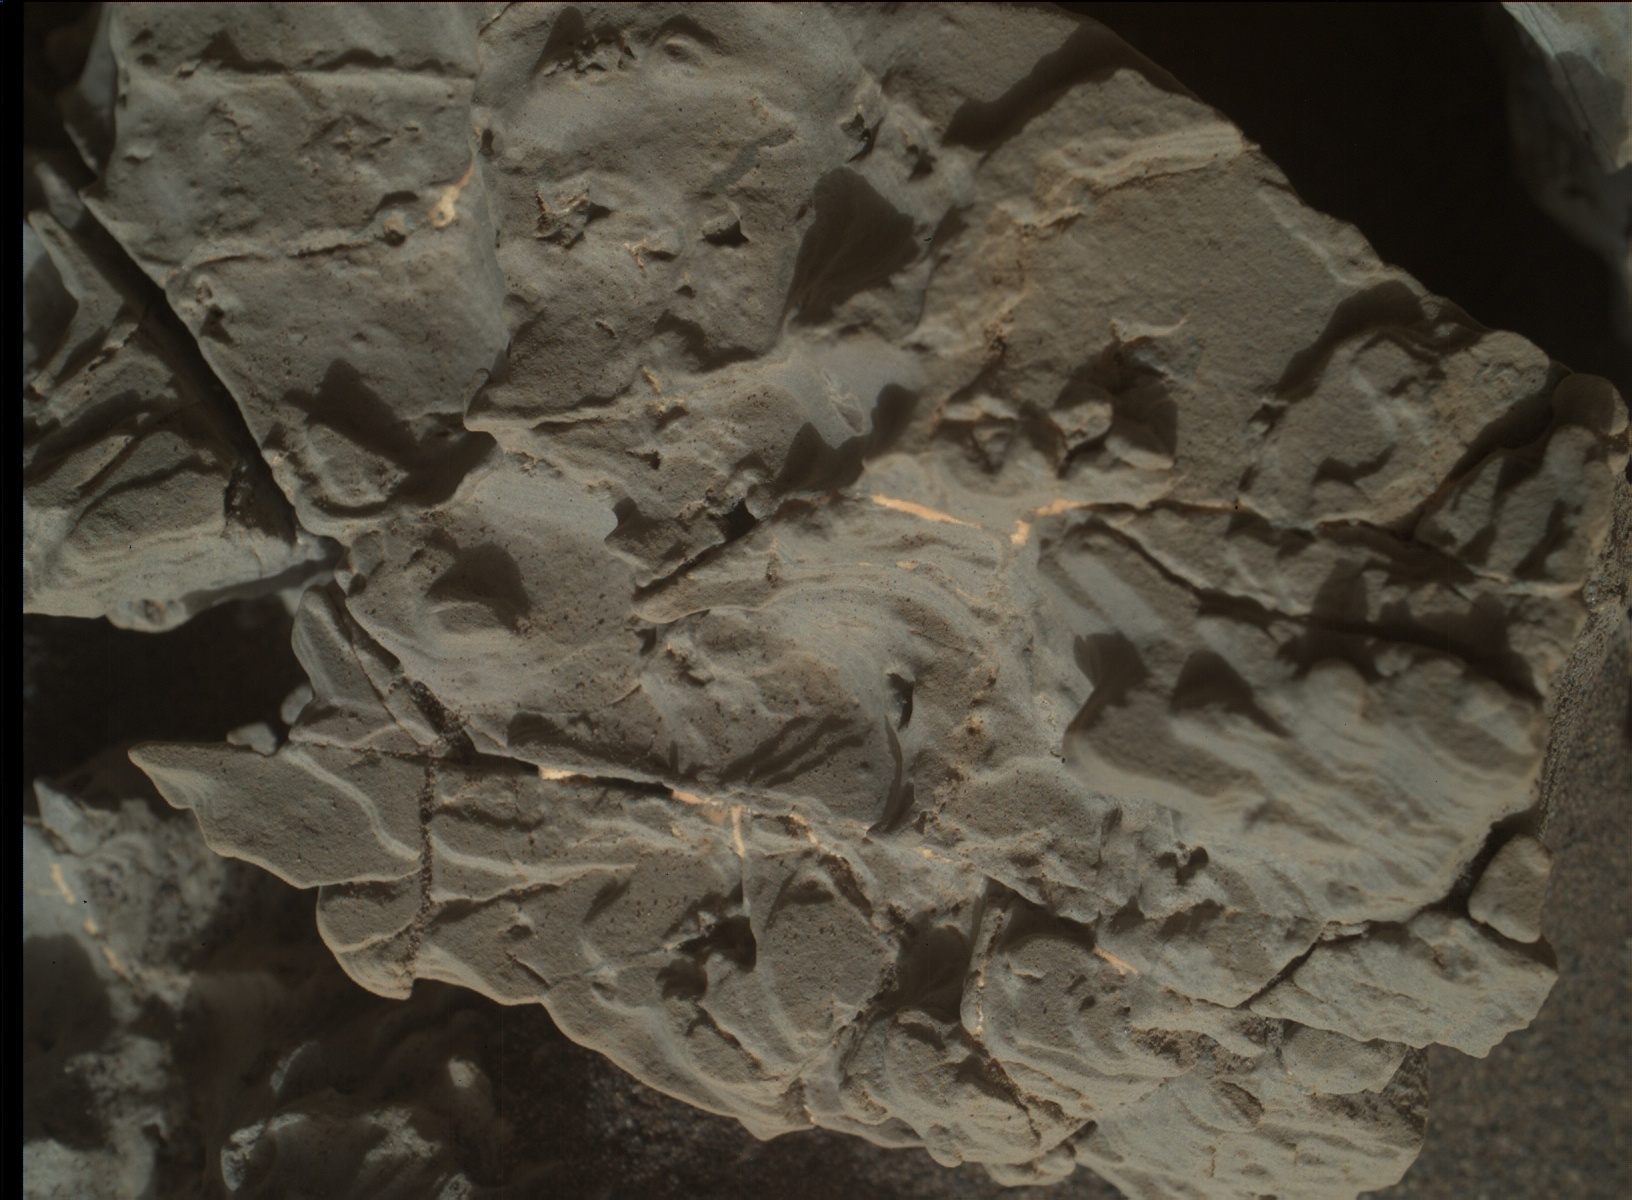 Nasa's Mars rover Curiosity acquired this image using its Mars Hand Lens Imager (MAHLI) on Sol 1935